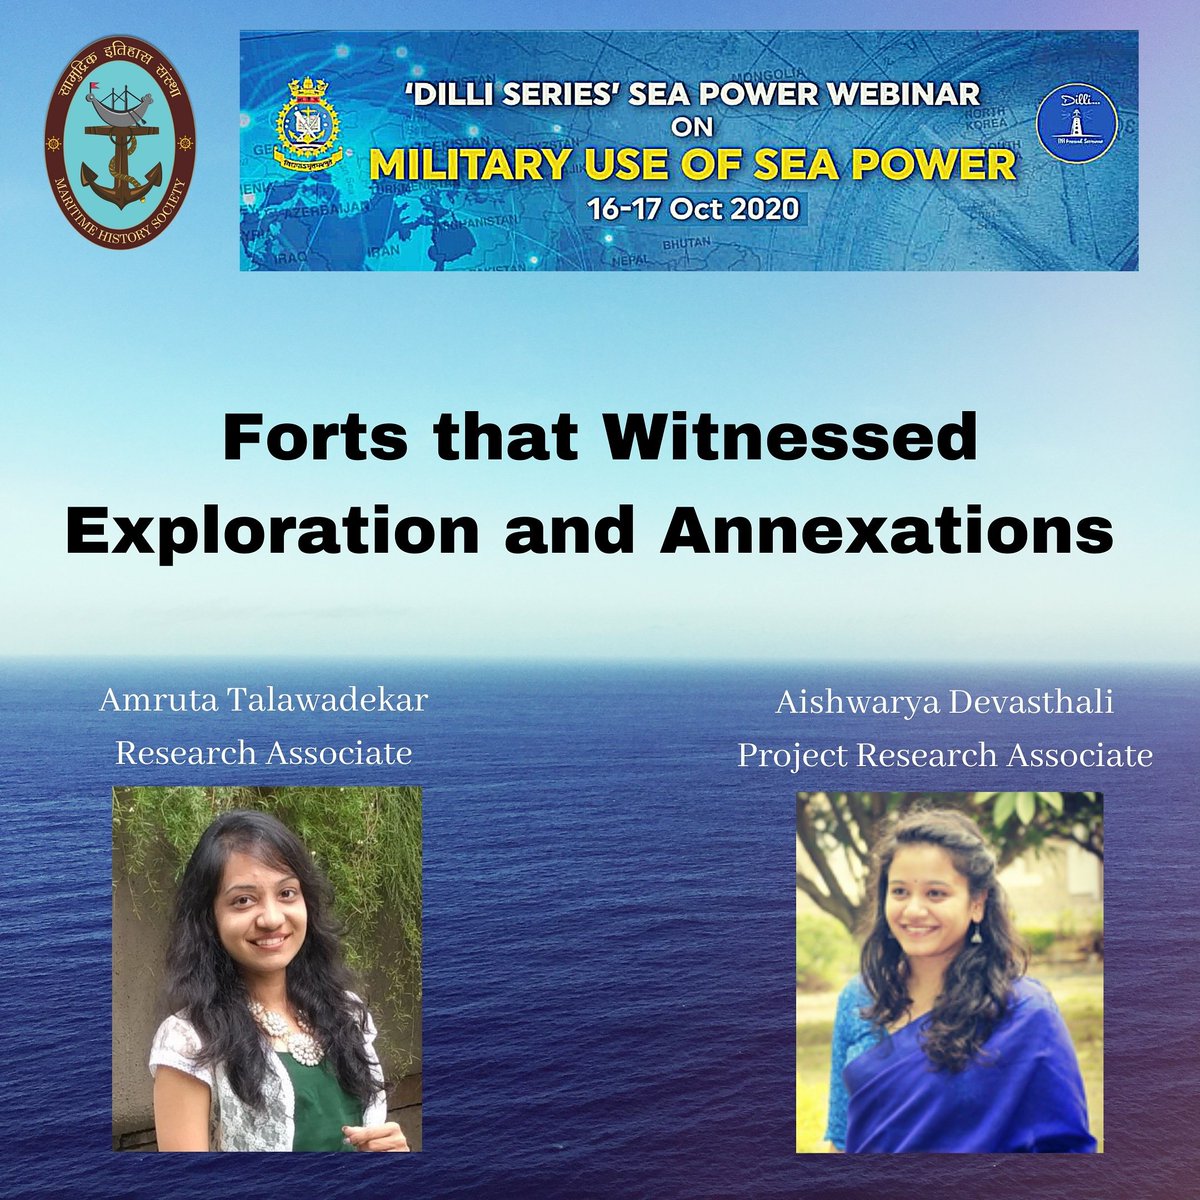 An honour for #MHS to share perspectives from its young scholars @ATalawadekar & @AishwaryaDevas3 on Forts as Eyewitness to Exploration & Annexation. Kudos to 9 years of collaboration! Let #HeritageAwaken #MaritimeConsciousness